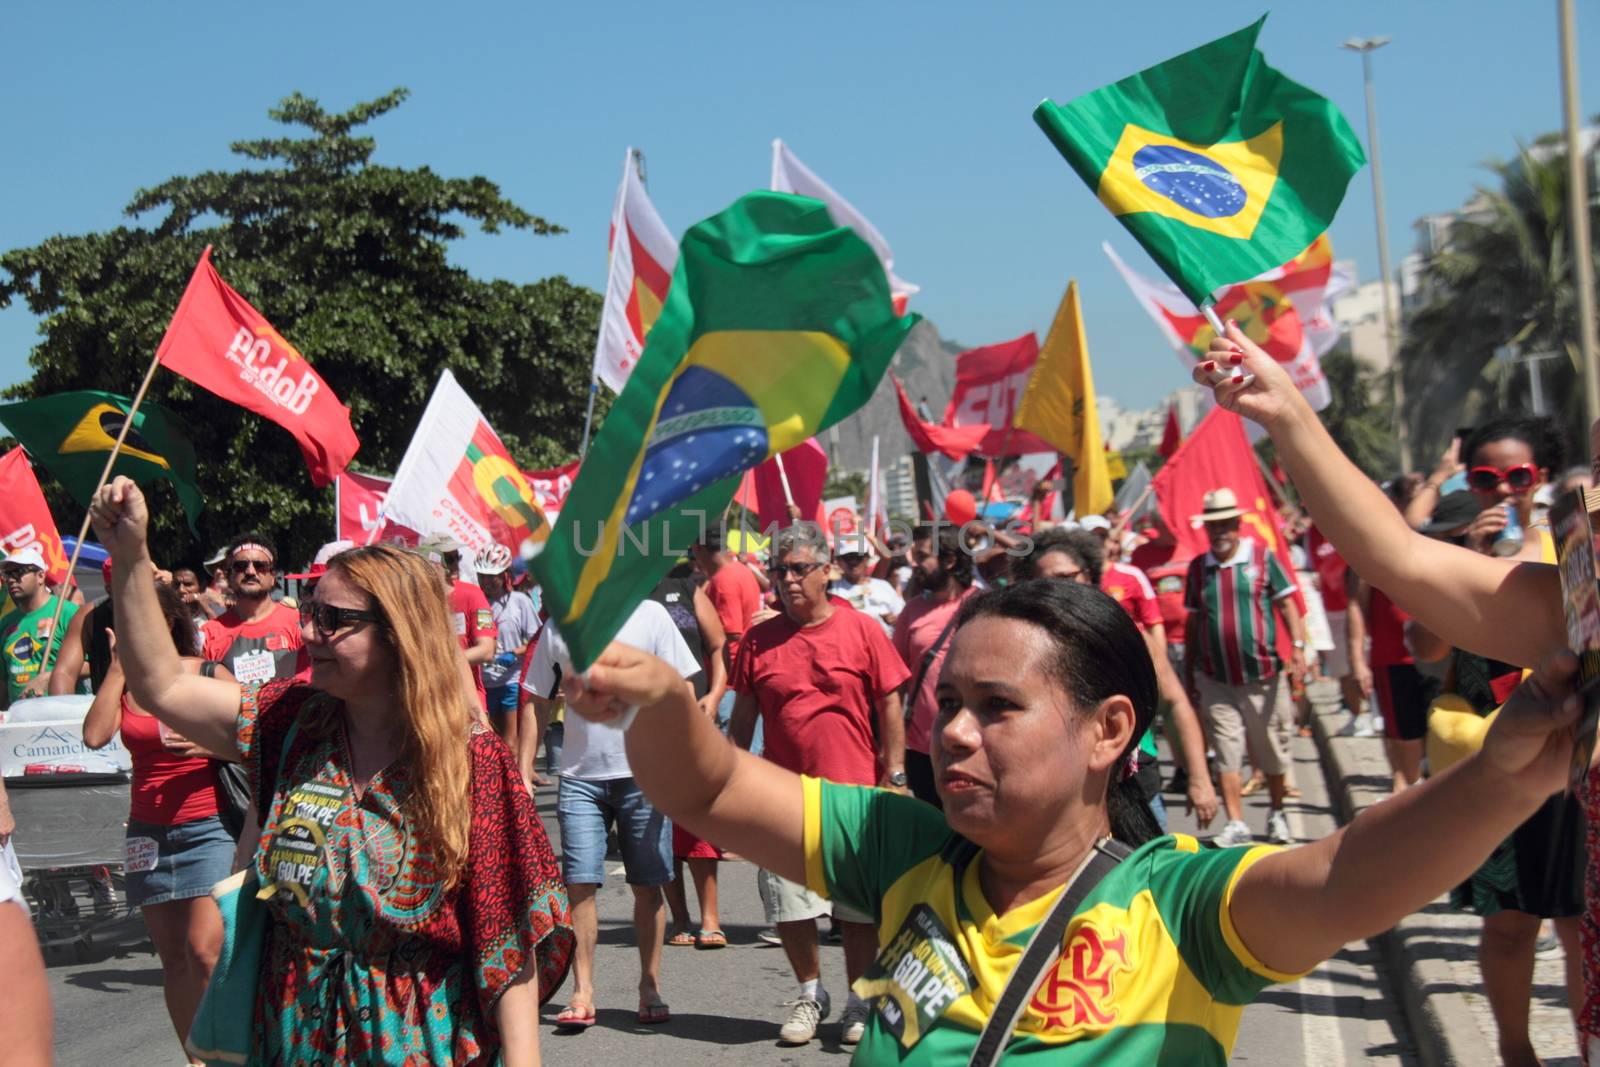 BRAZIL, Rio de Janeiro: Protesters wave flags at a rally on Copacabana Beach in Rio de Janeiro, Brazil on April 17, 2016, against the impeachment of President Dilma Rousseff. Rousseff faces an impeachment vote today over charges of manipulating government accounts. Brazil's lower house is voting on whether to continue impeachment proceedings. 342 out of 513 votes are needed to continue the proceedings to the upper house.